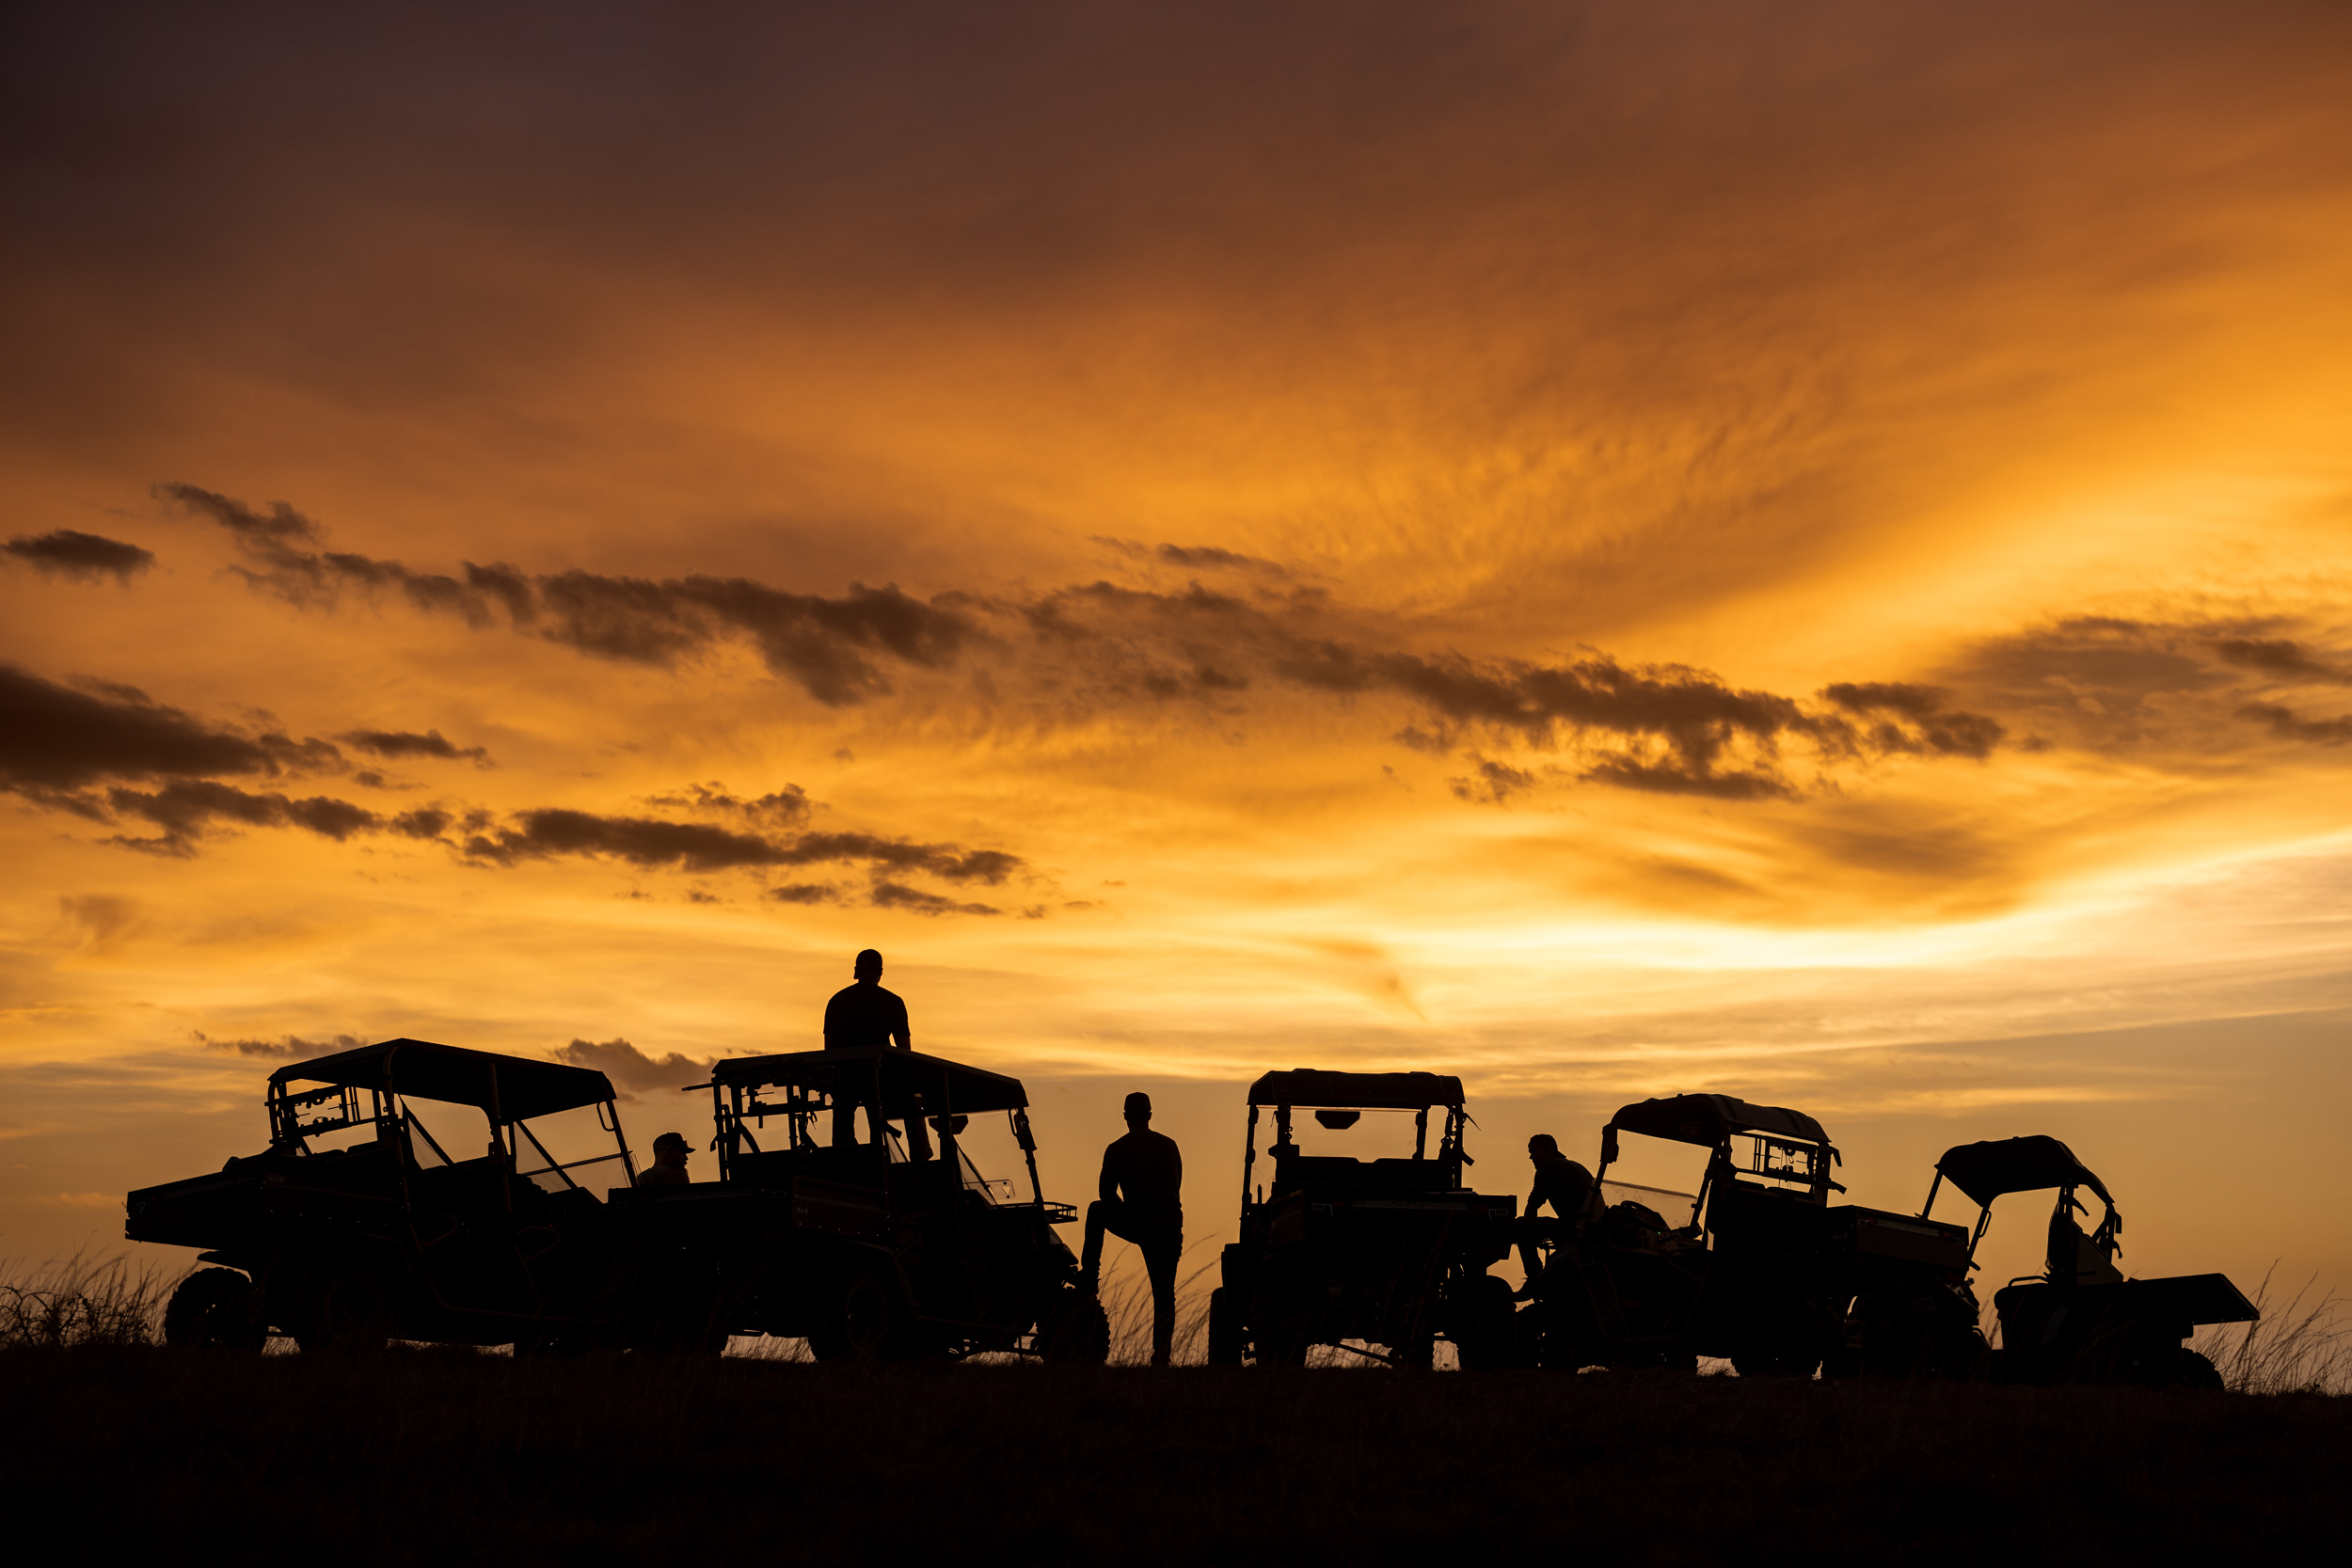 group of people and utv vehicles silhouette at sunset near cliff